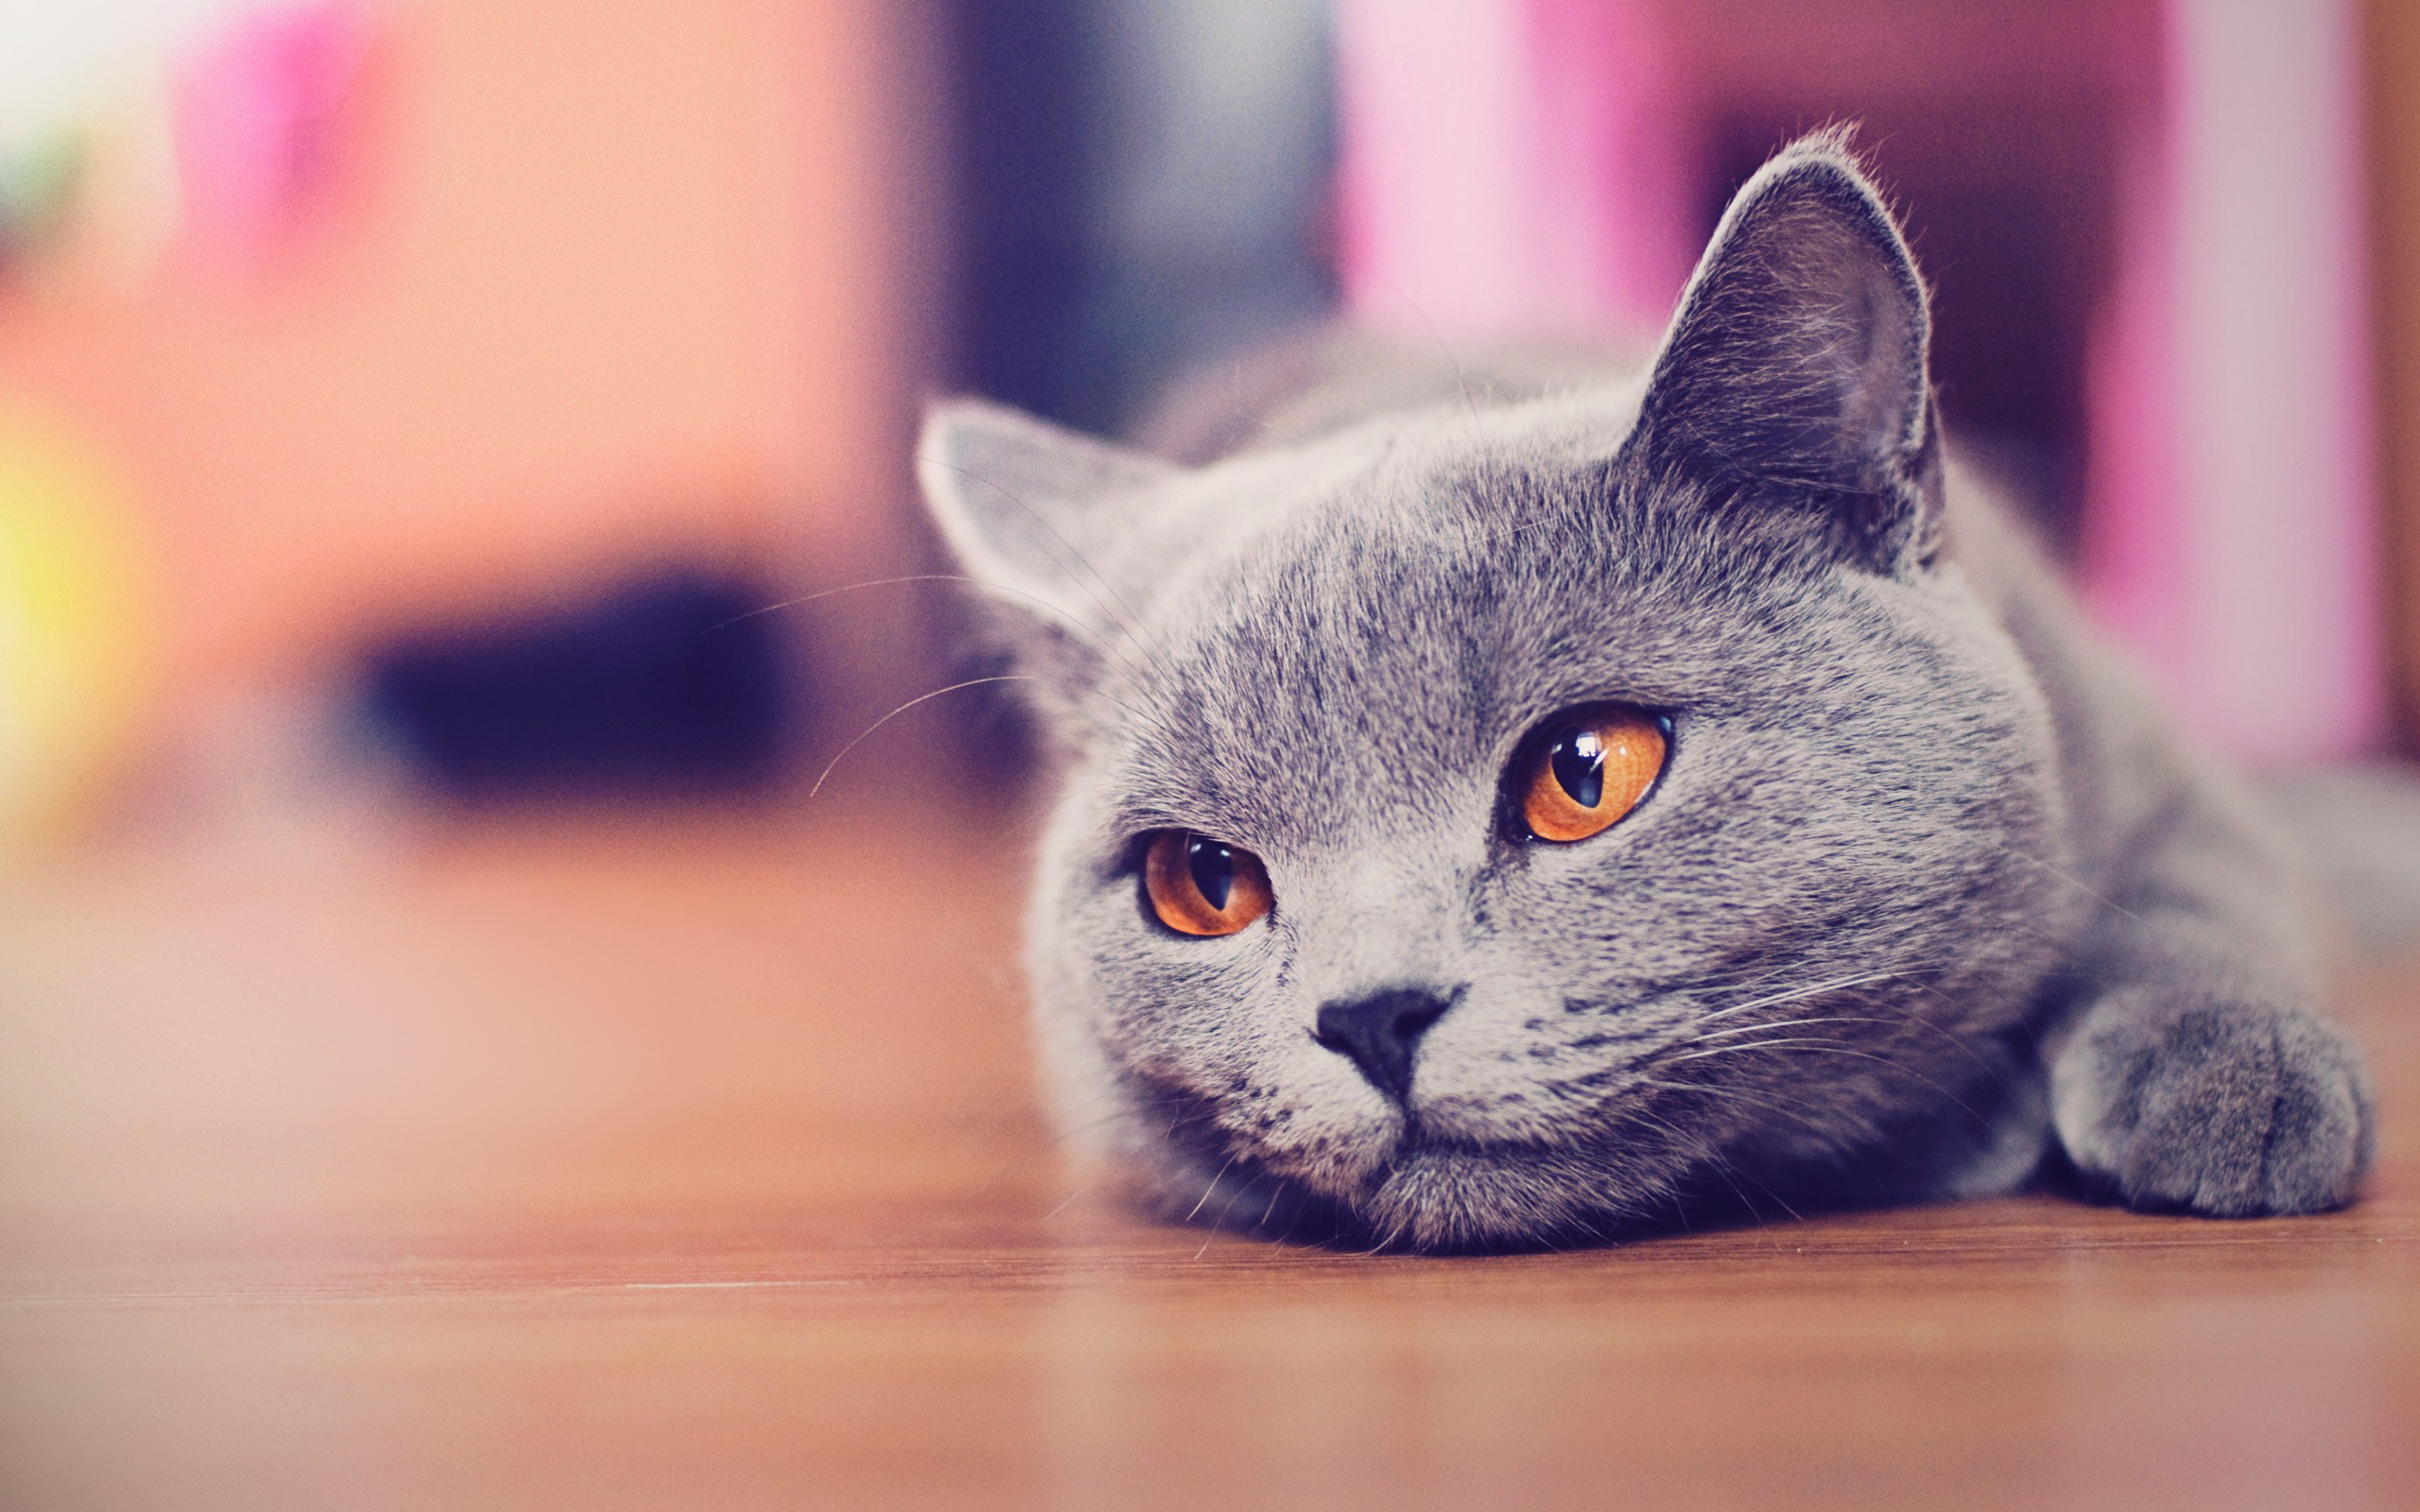 Cat wallpaper ·① Download free stunning backgrounds for desktop and